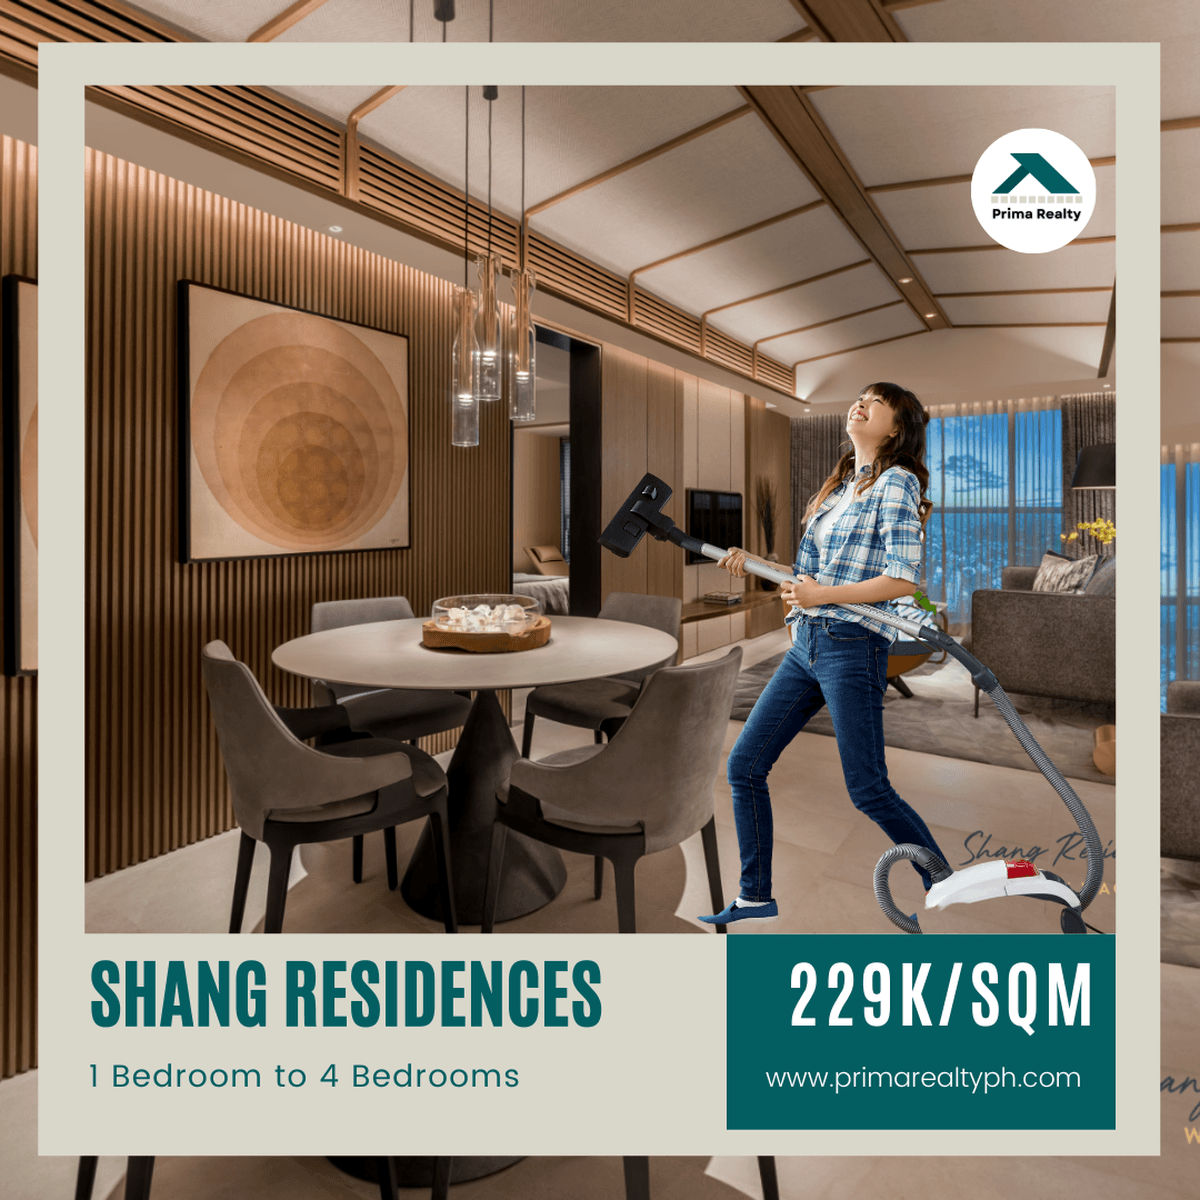 1 Bedroom Condo Unit For Sale in Shang Residences in Mandaluyong